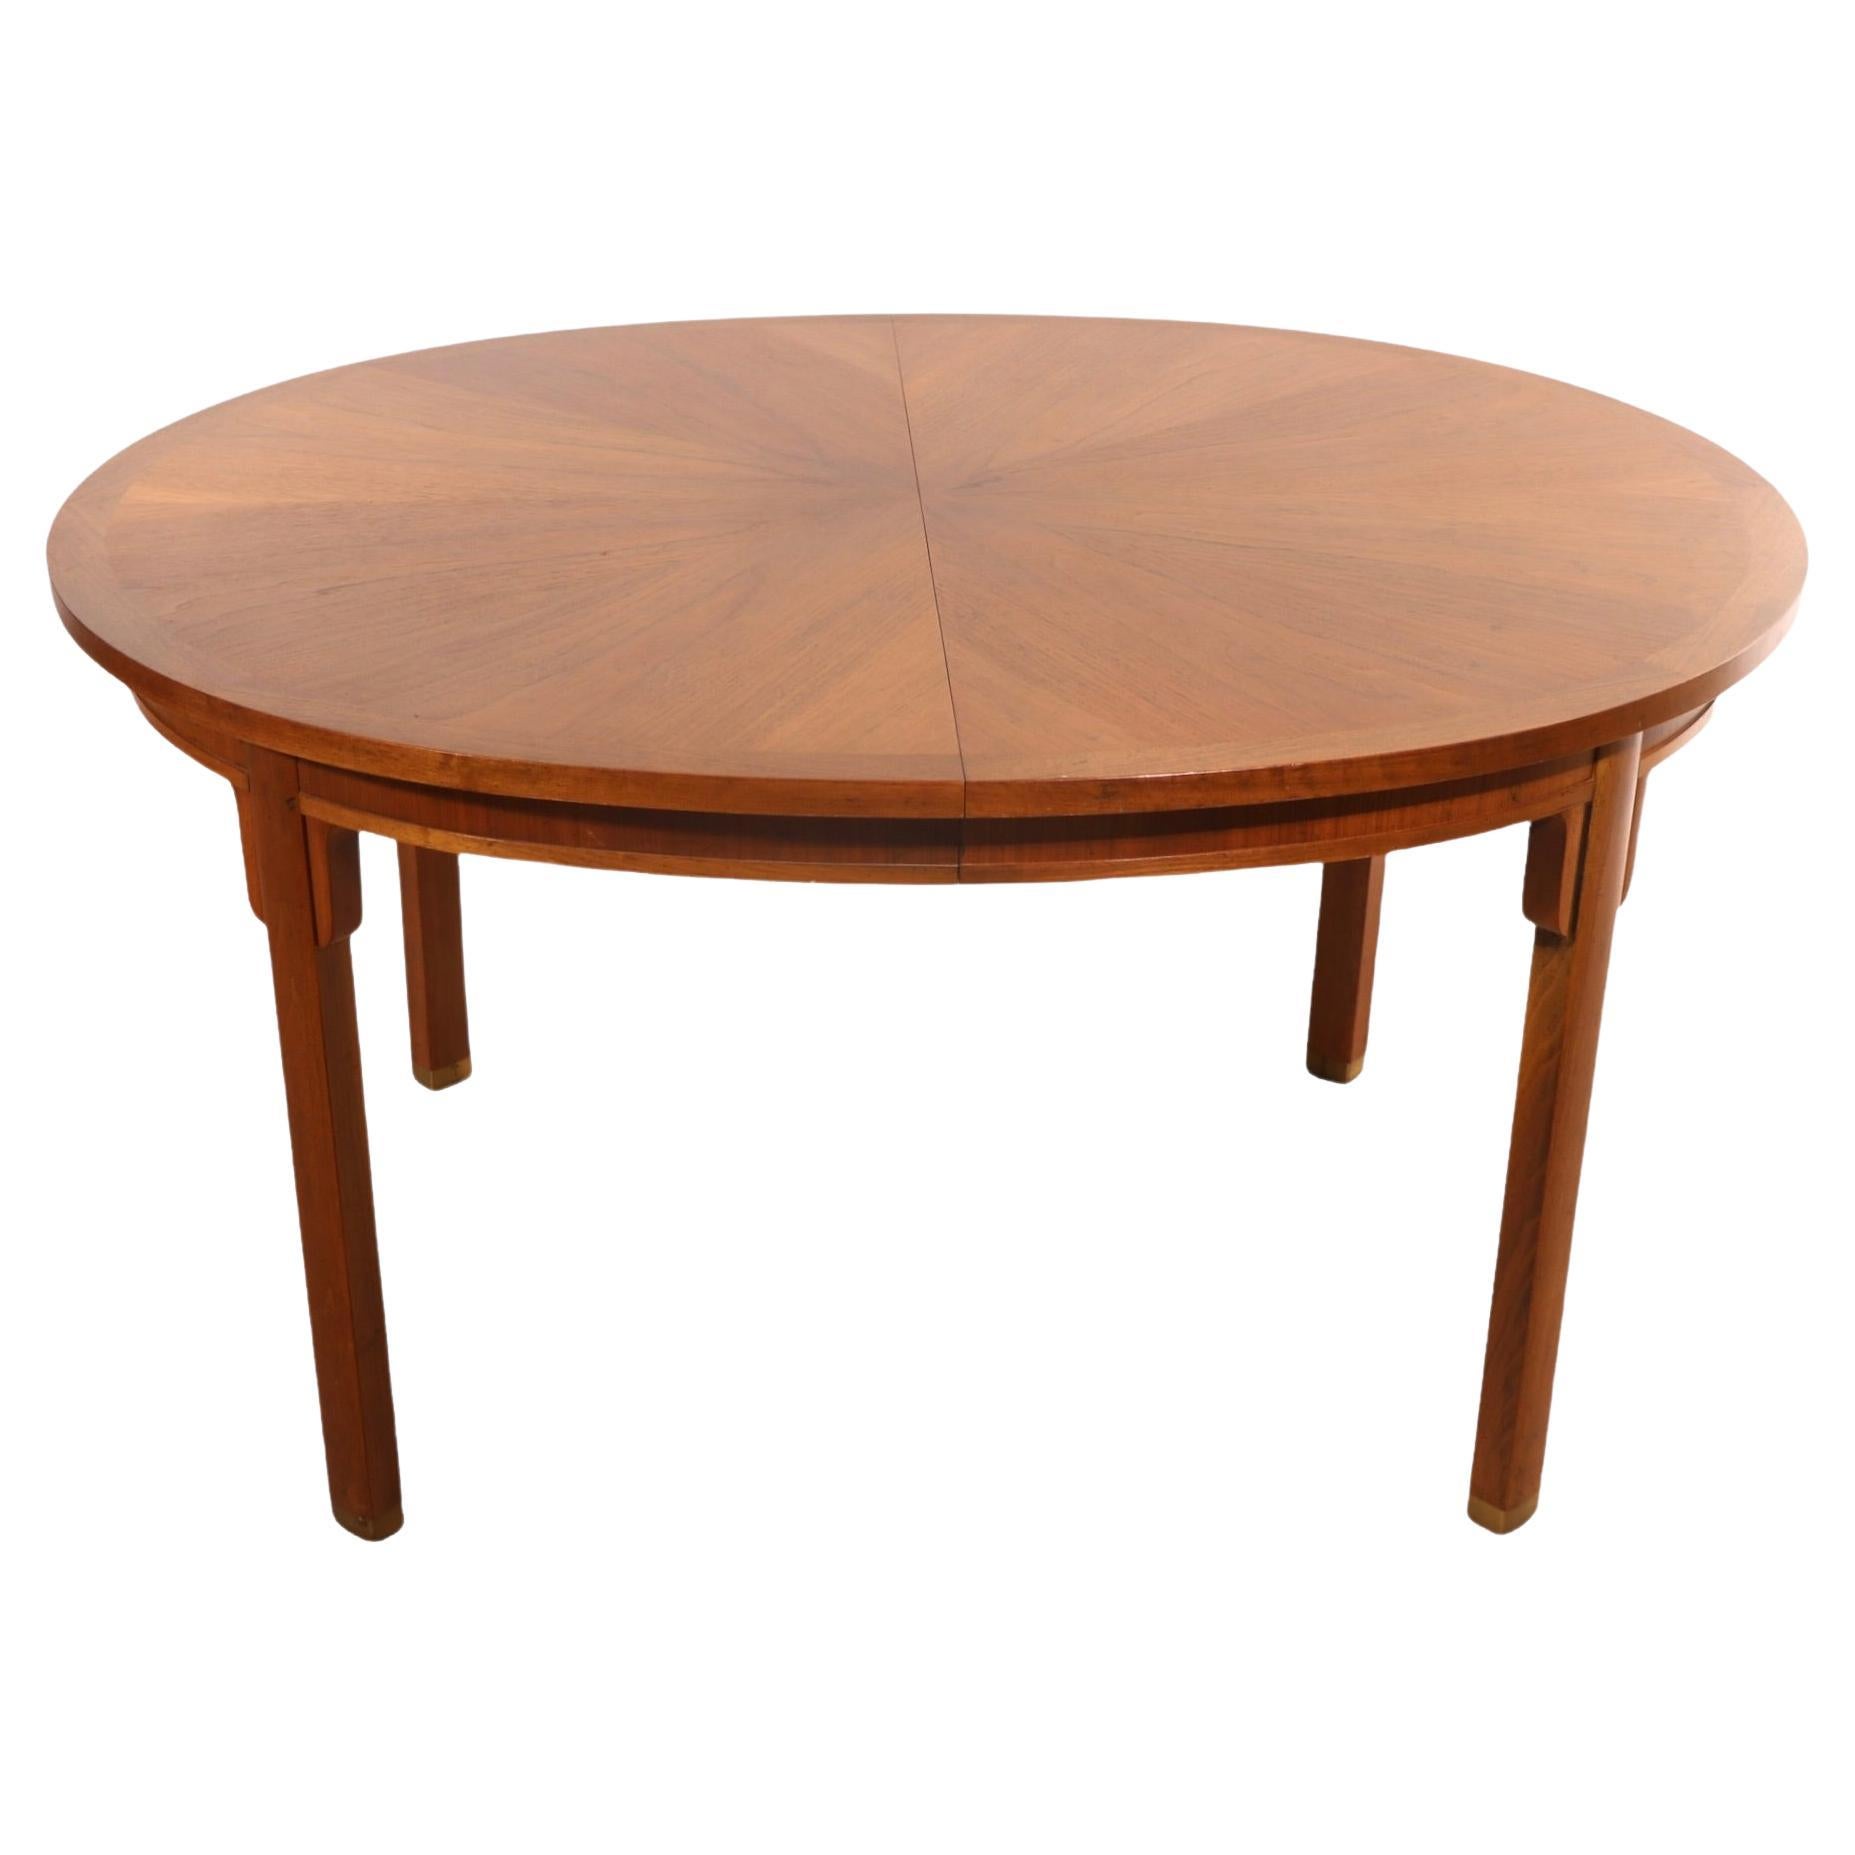 Chinese Asia Modern Style Dining Table by Milling Road Baker Furniture Company 